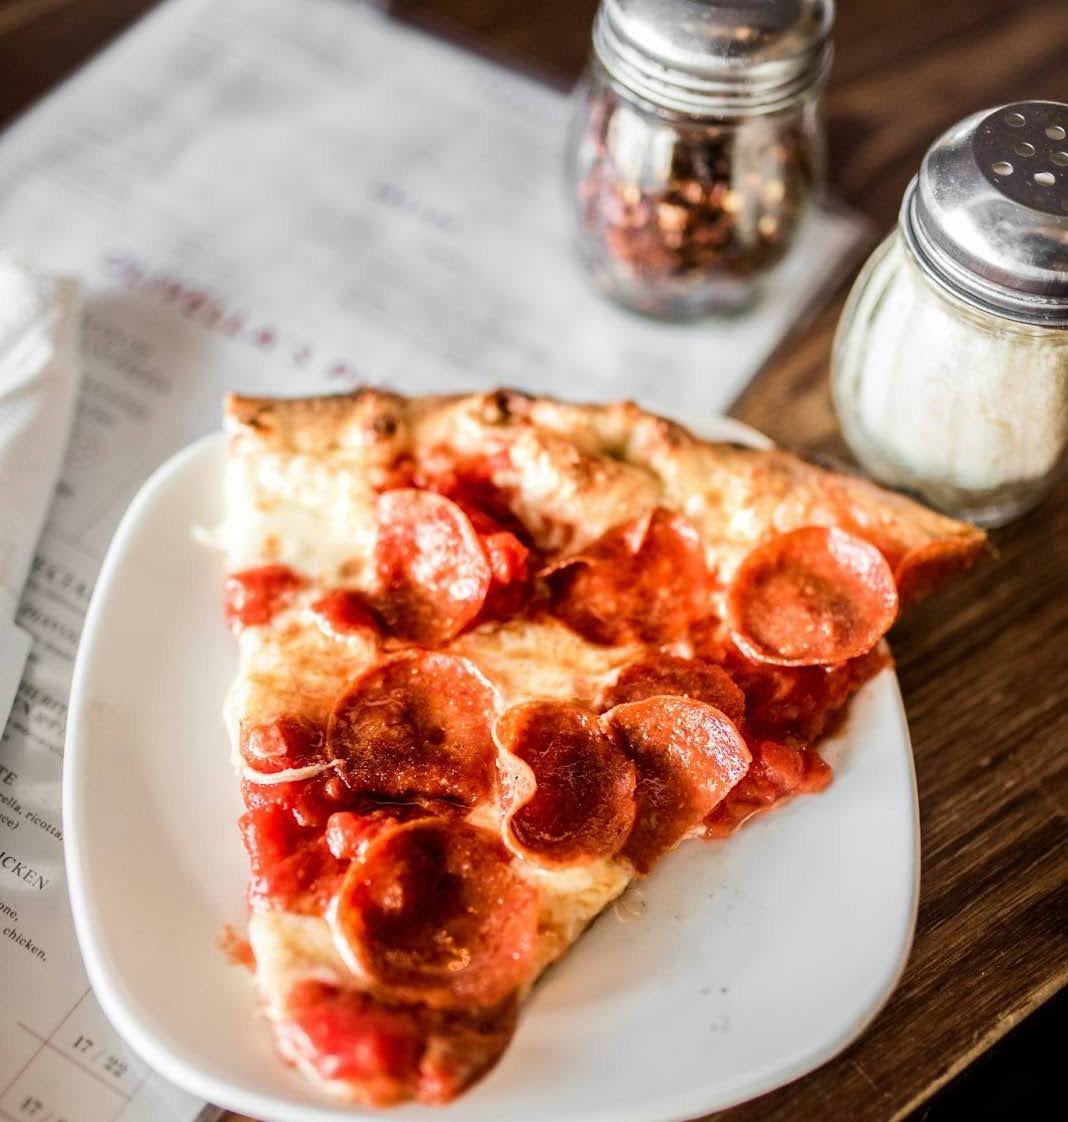 ALT IMG TXT: A slice of pepperoni pizza on a white plate atop a table with jars of seasoning nearby.